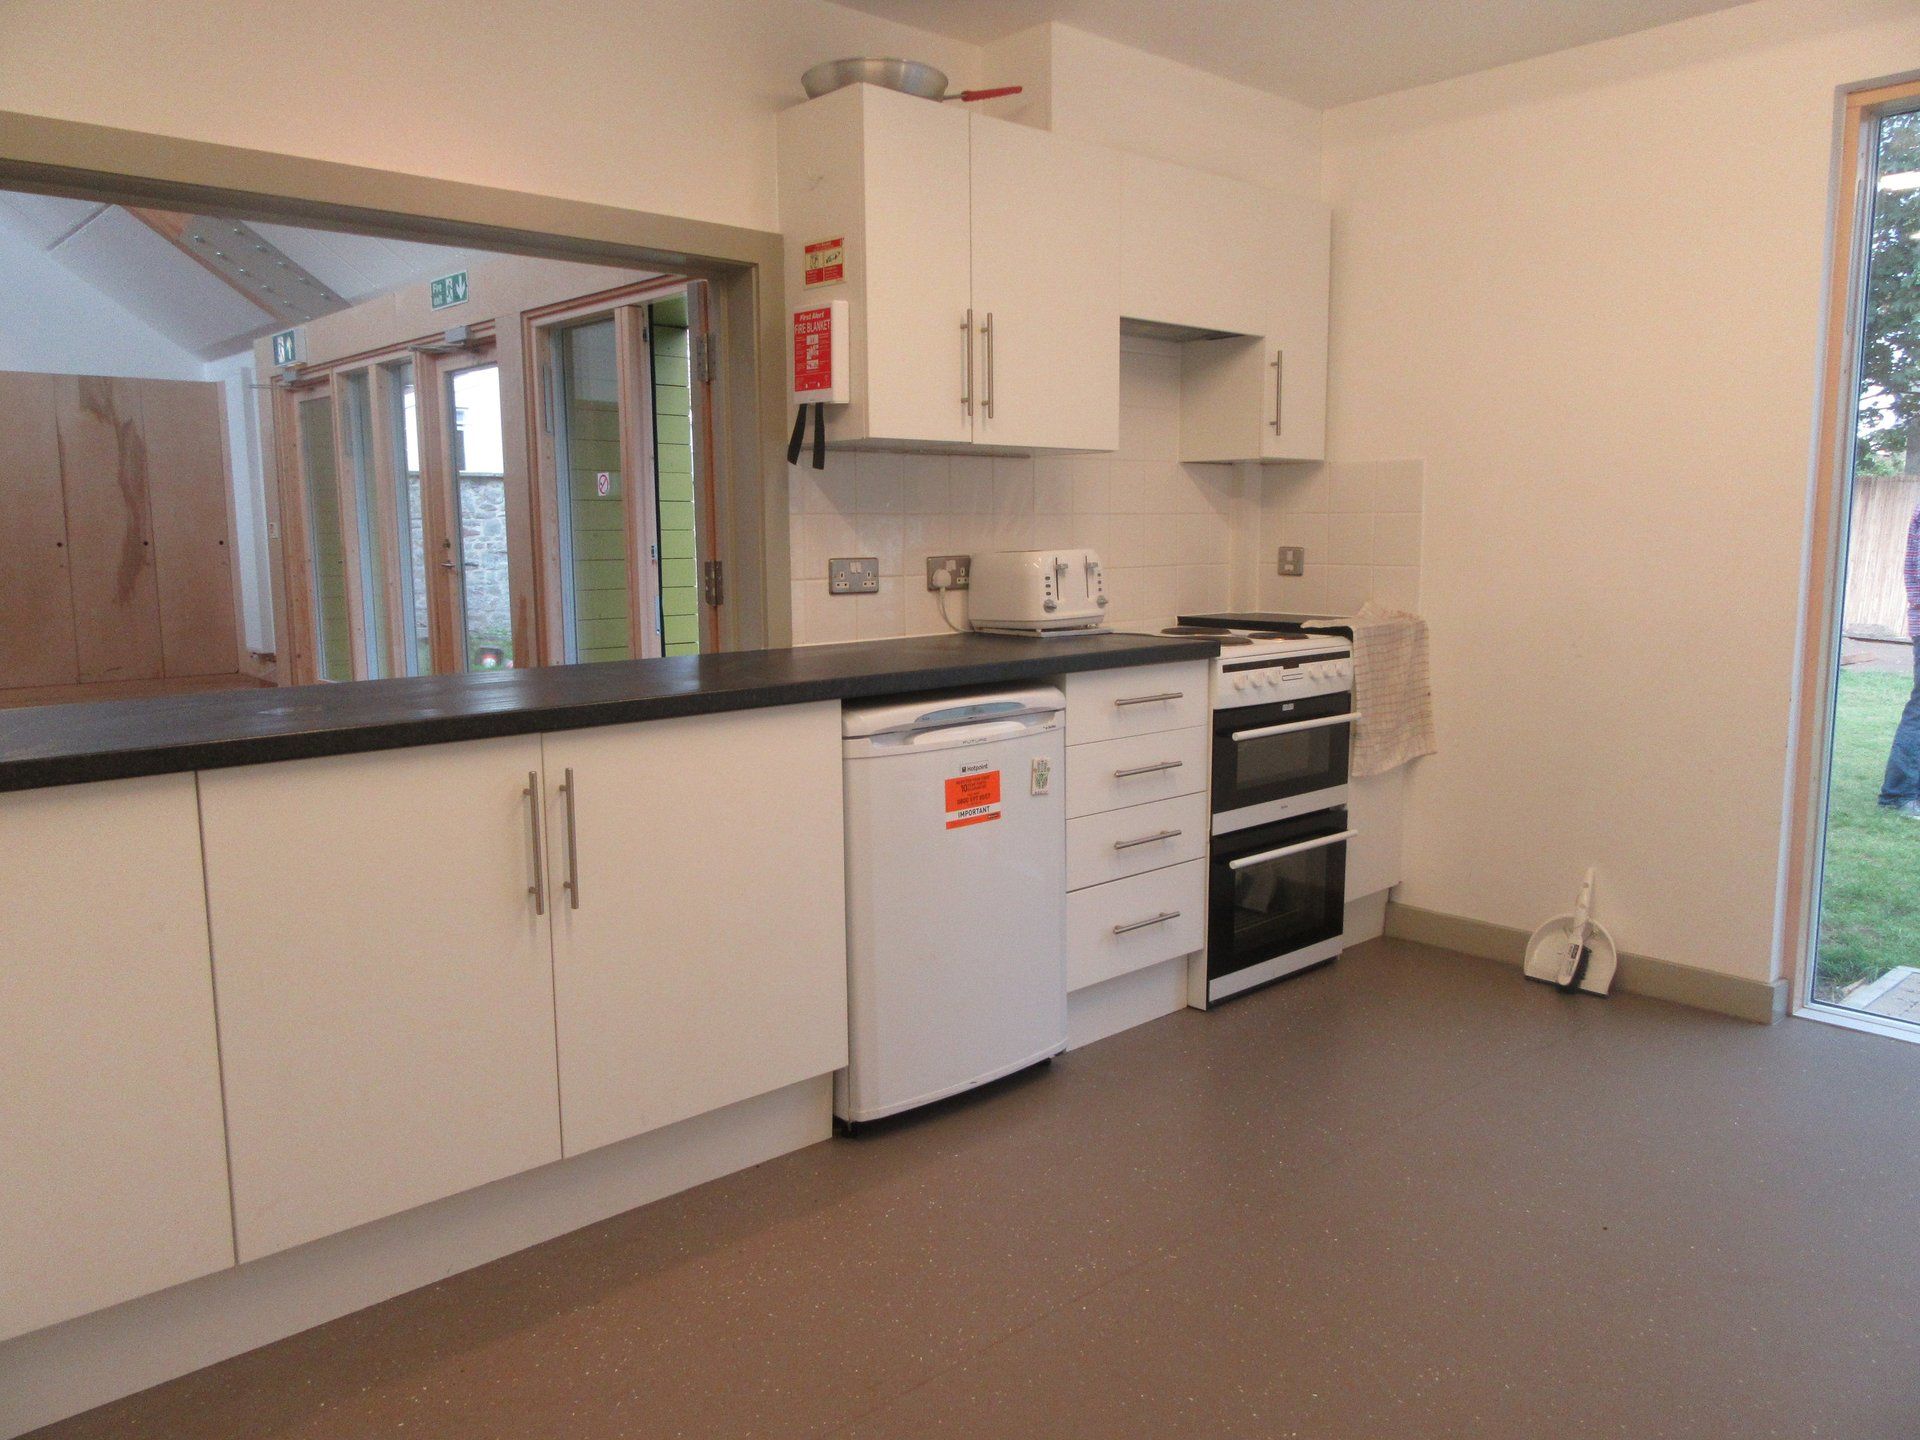 Kitchen area of Scout hut